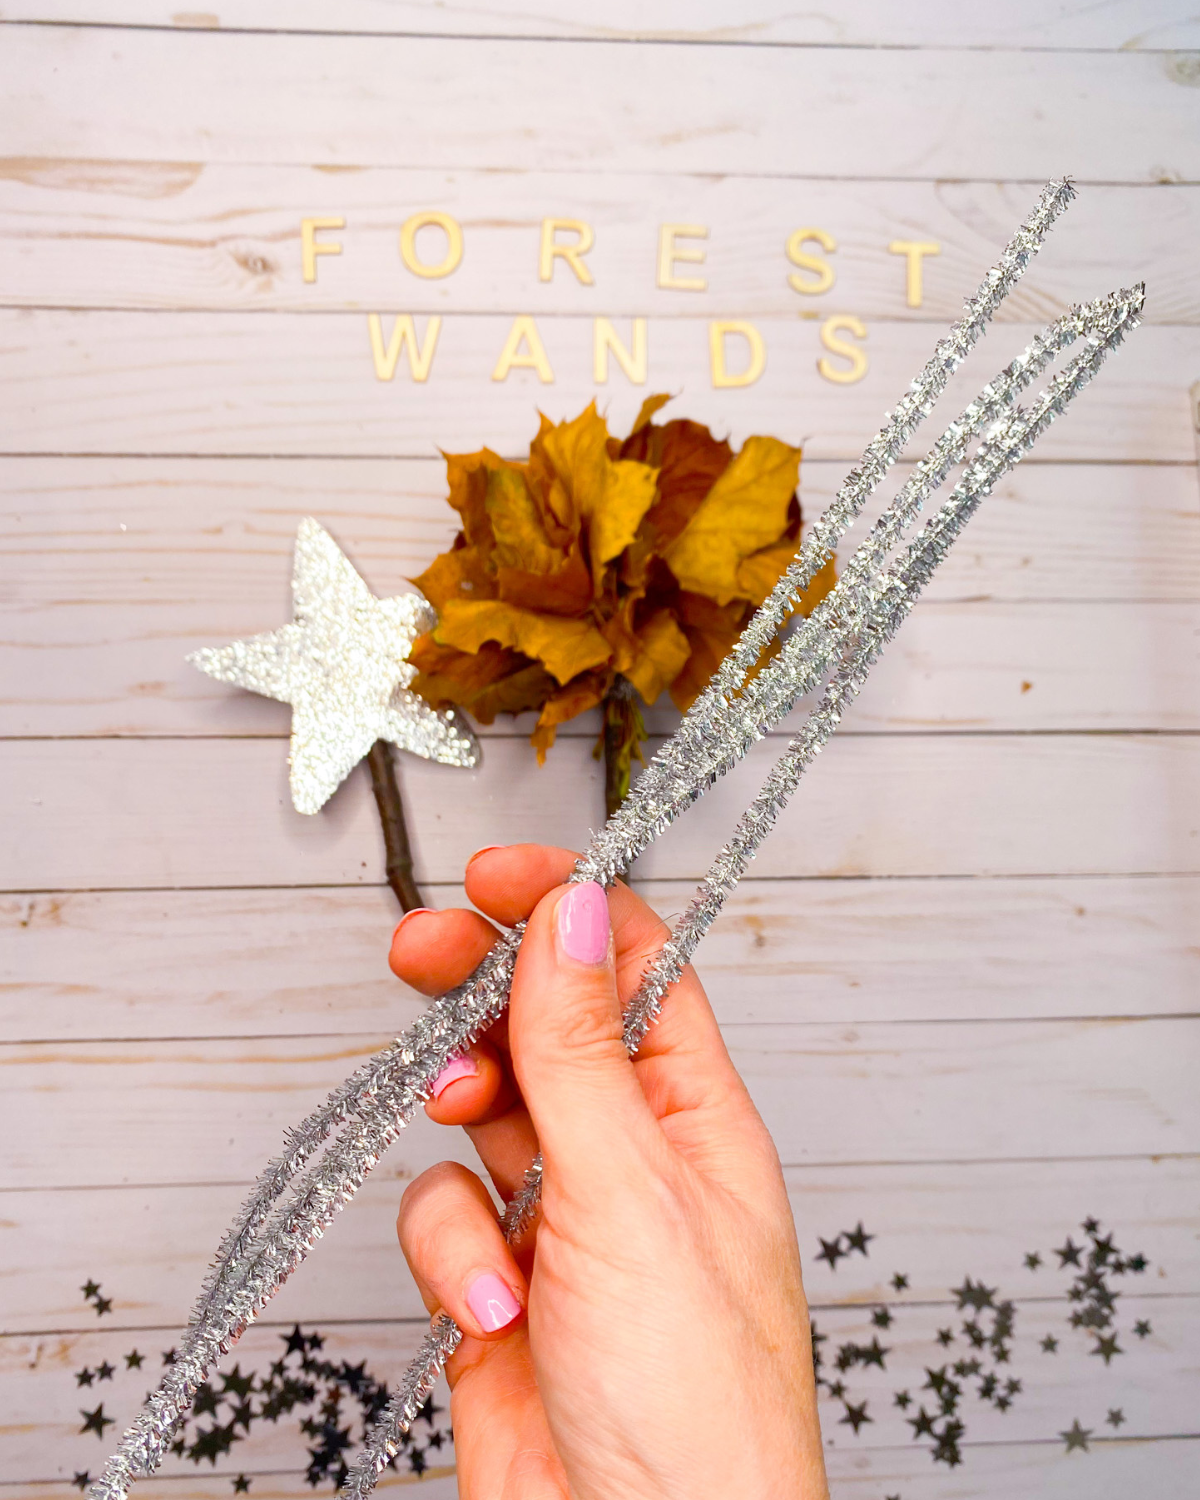 Fall-crafts-for-kids-magical-forest-wands-pipe-cleaner.png